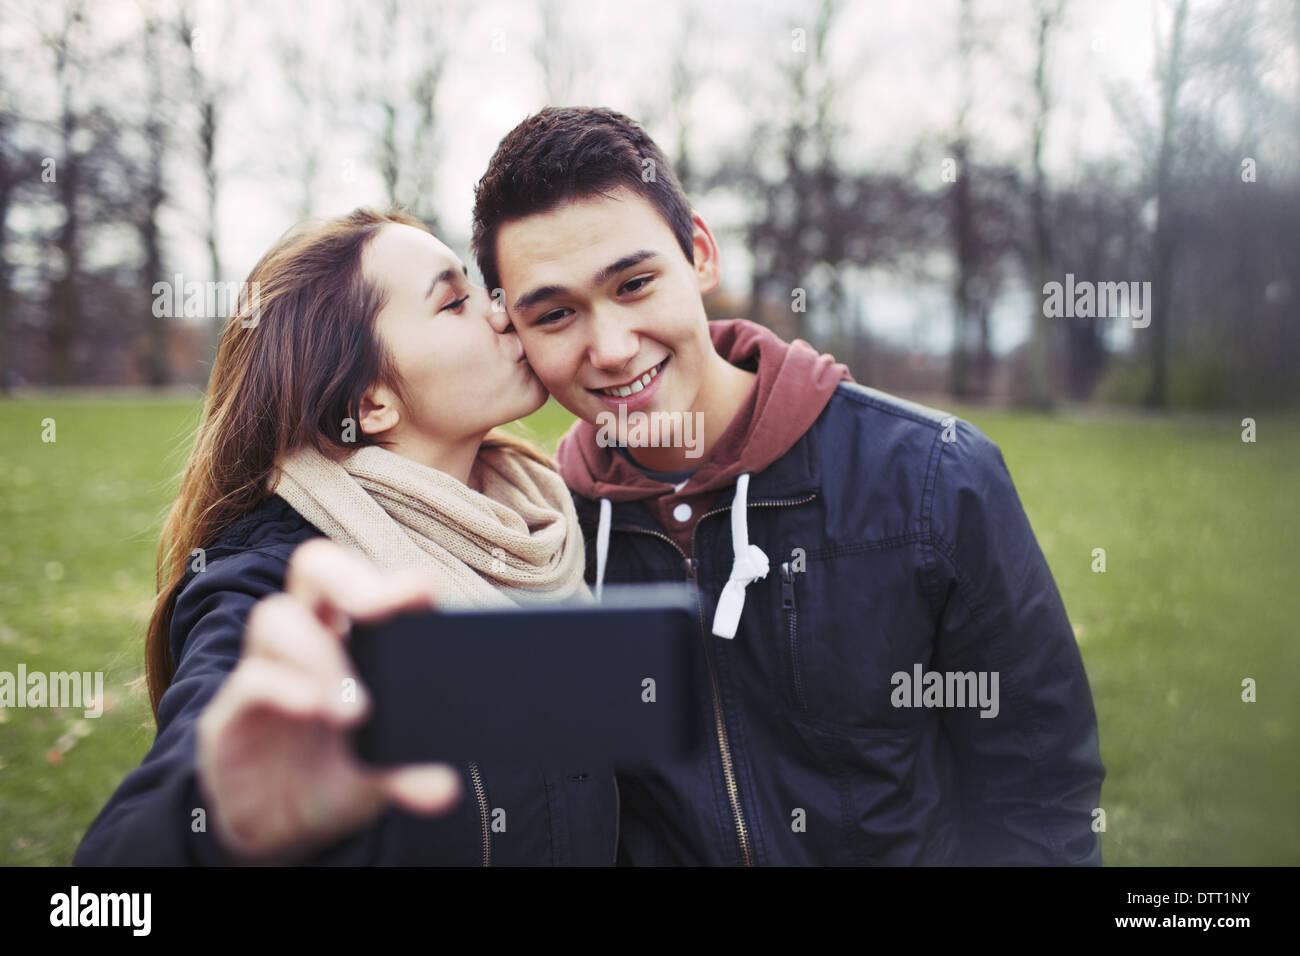 Pretty young girl kissing her boyfriend on cheeks while taking self portrait with a mobile phone. Mixed race couple in park. Stock Photo